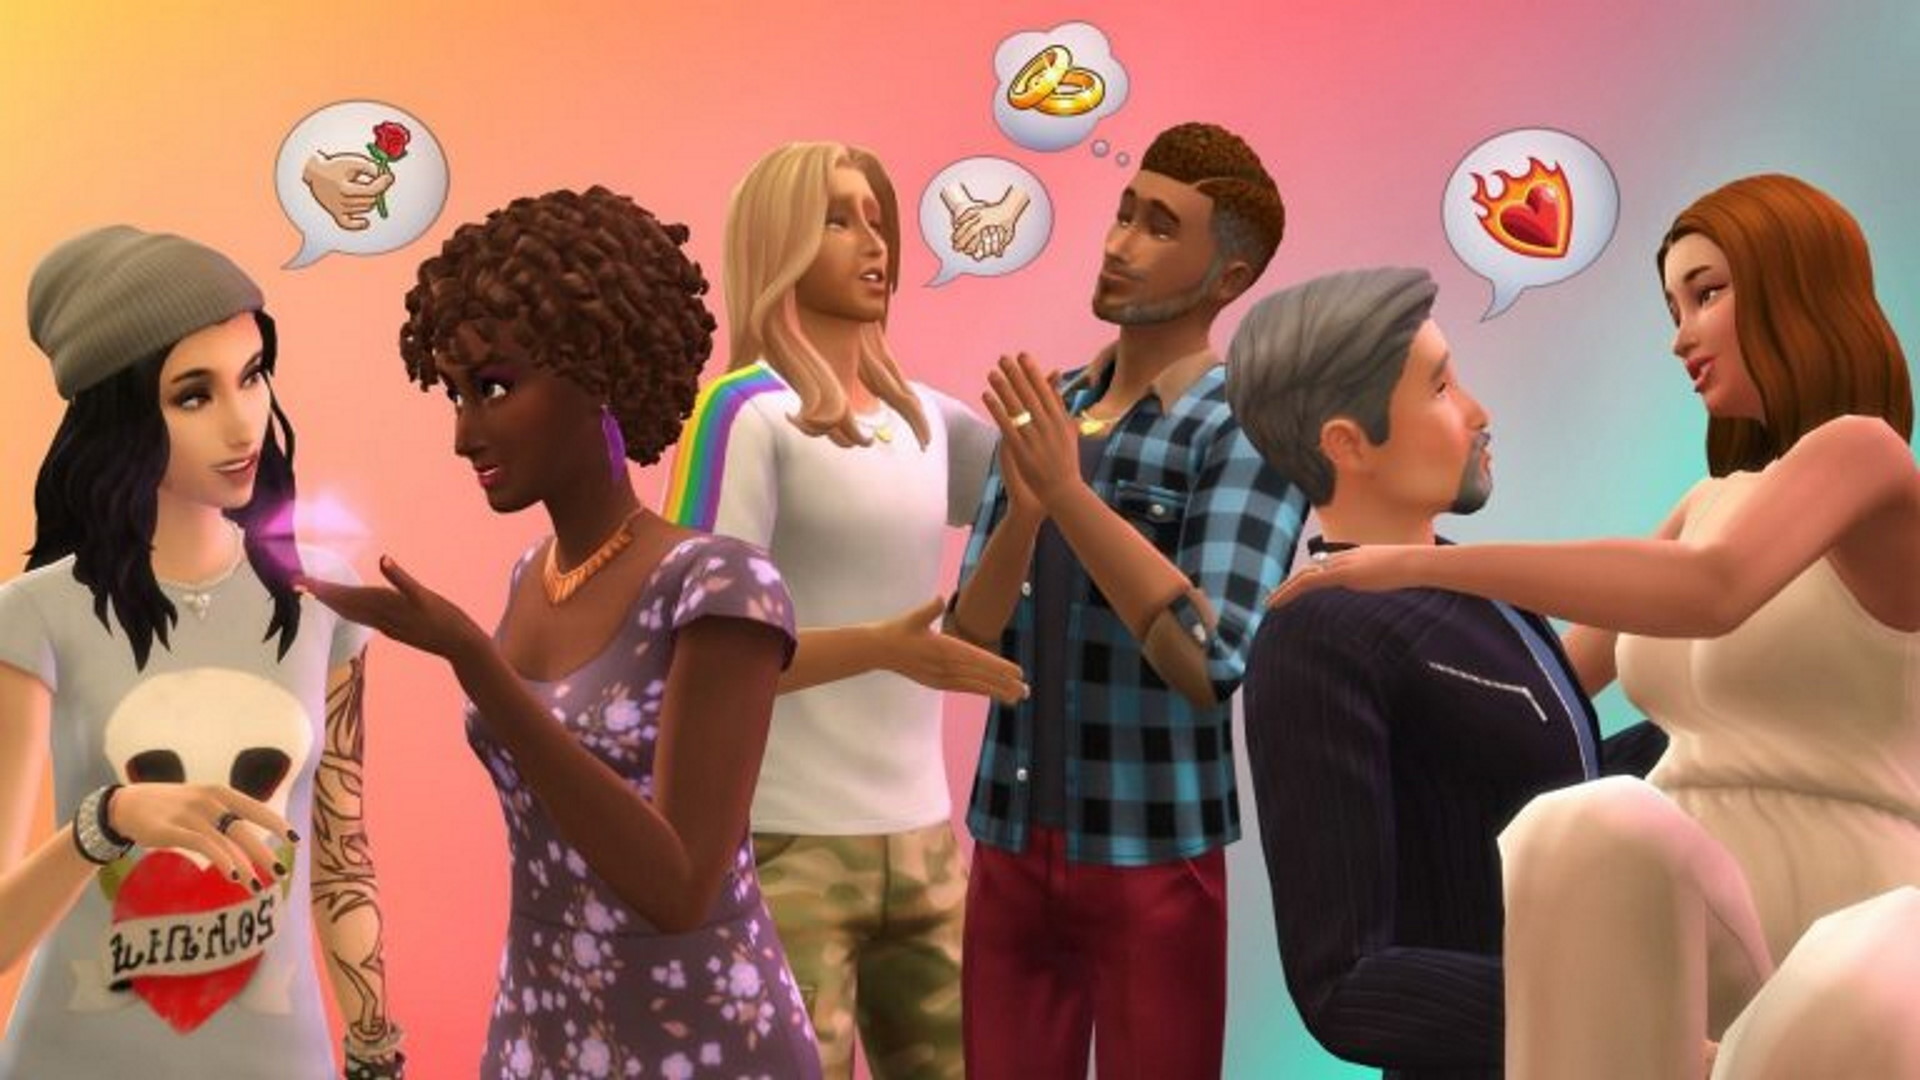  The Sims 4's new roadmap details the 'Season of Love' with two build kits and a romantic expansion 